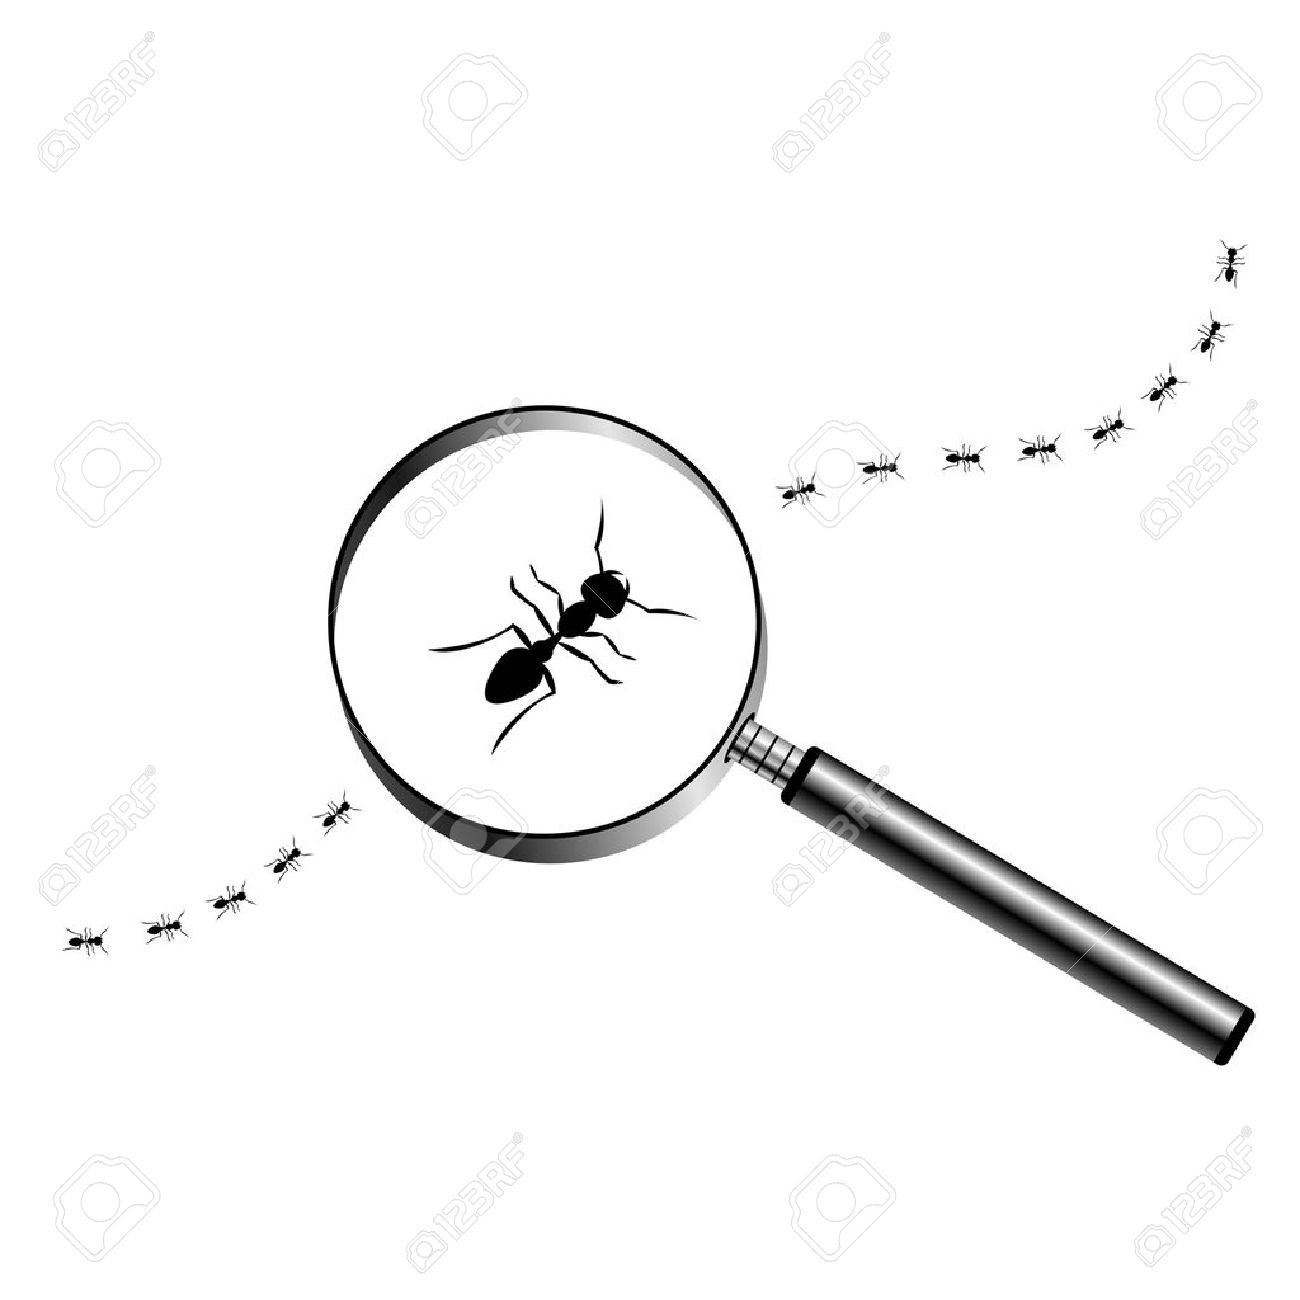 Magnifying glass clipart.